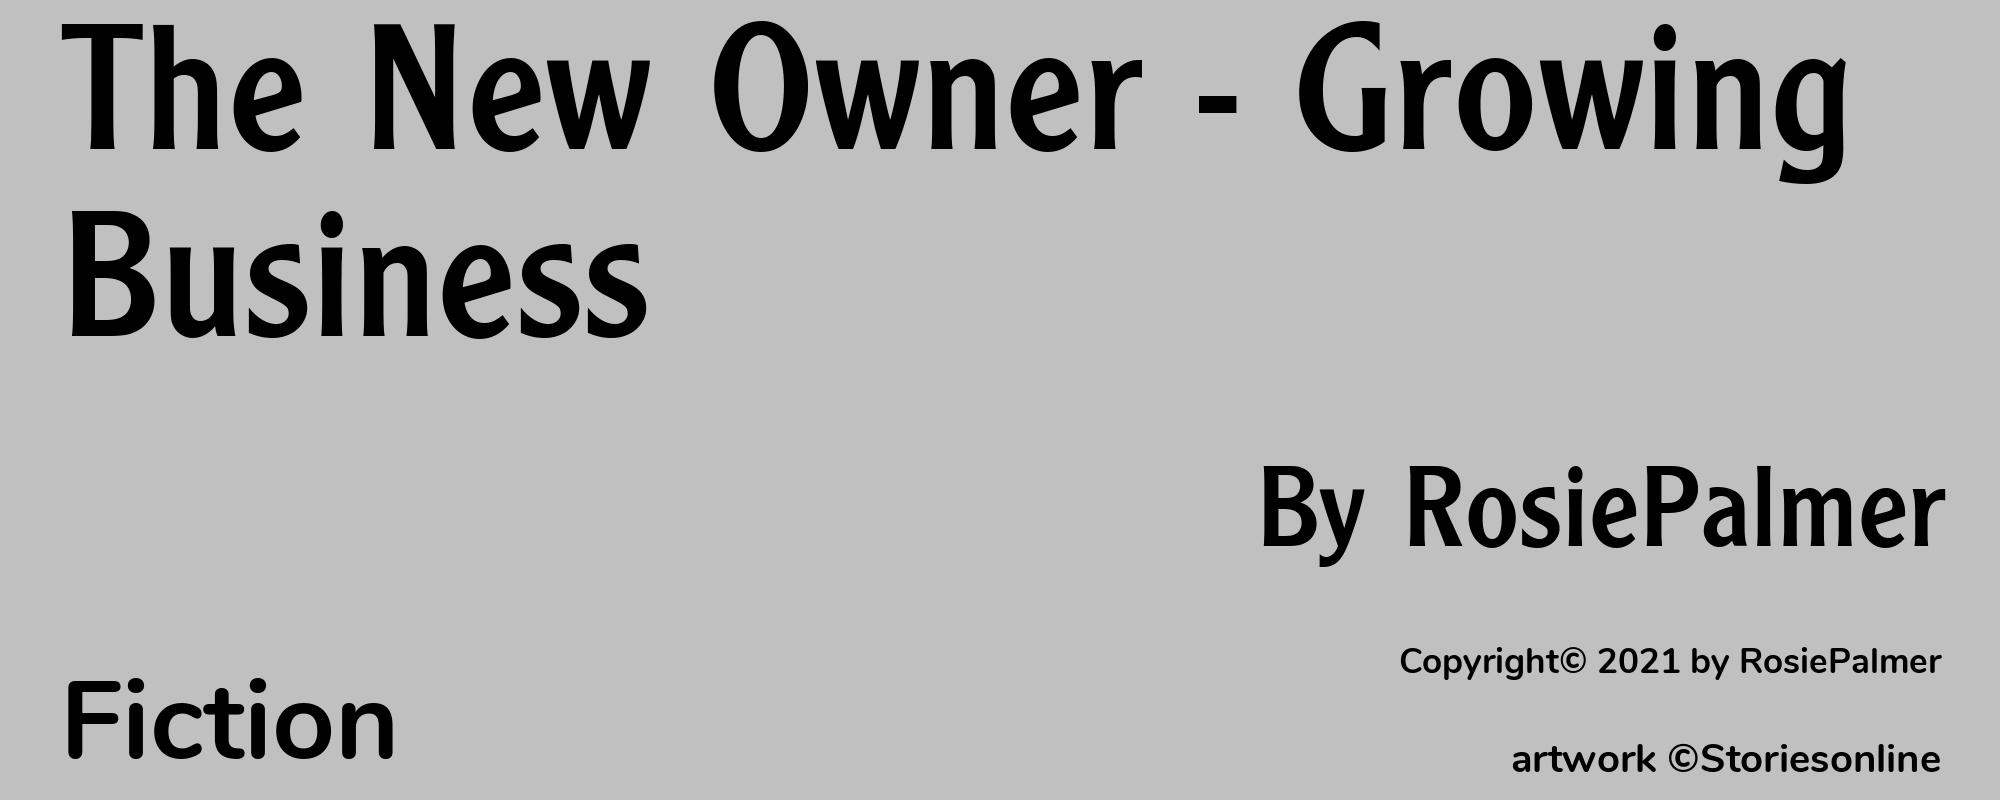 The New Owner - Growing Business - Cover